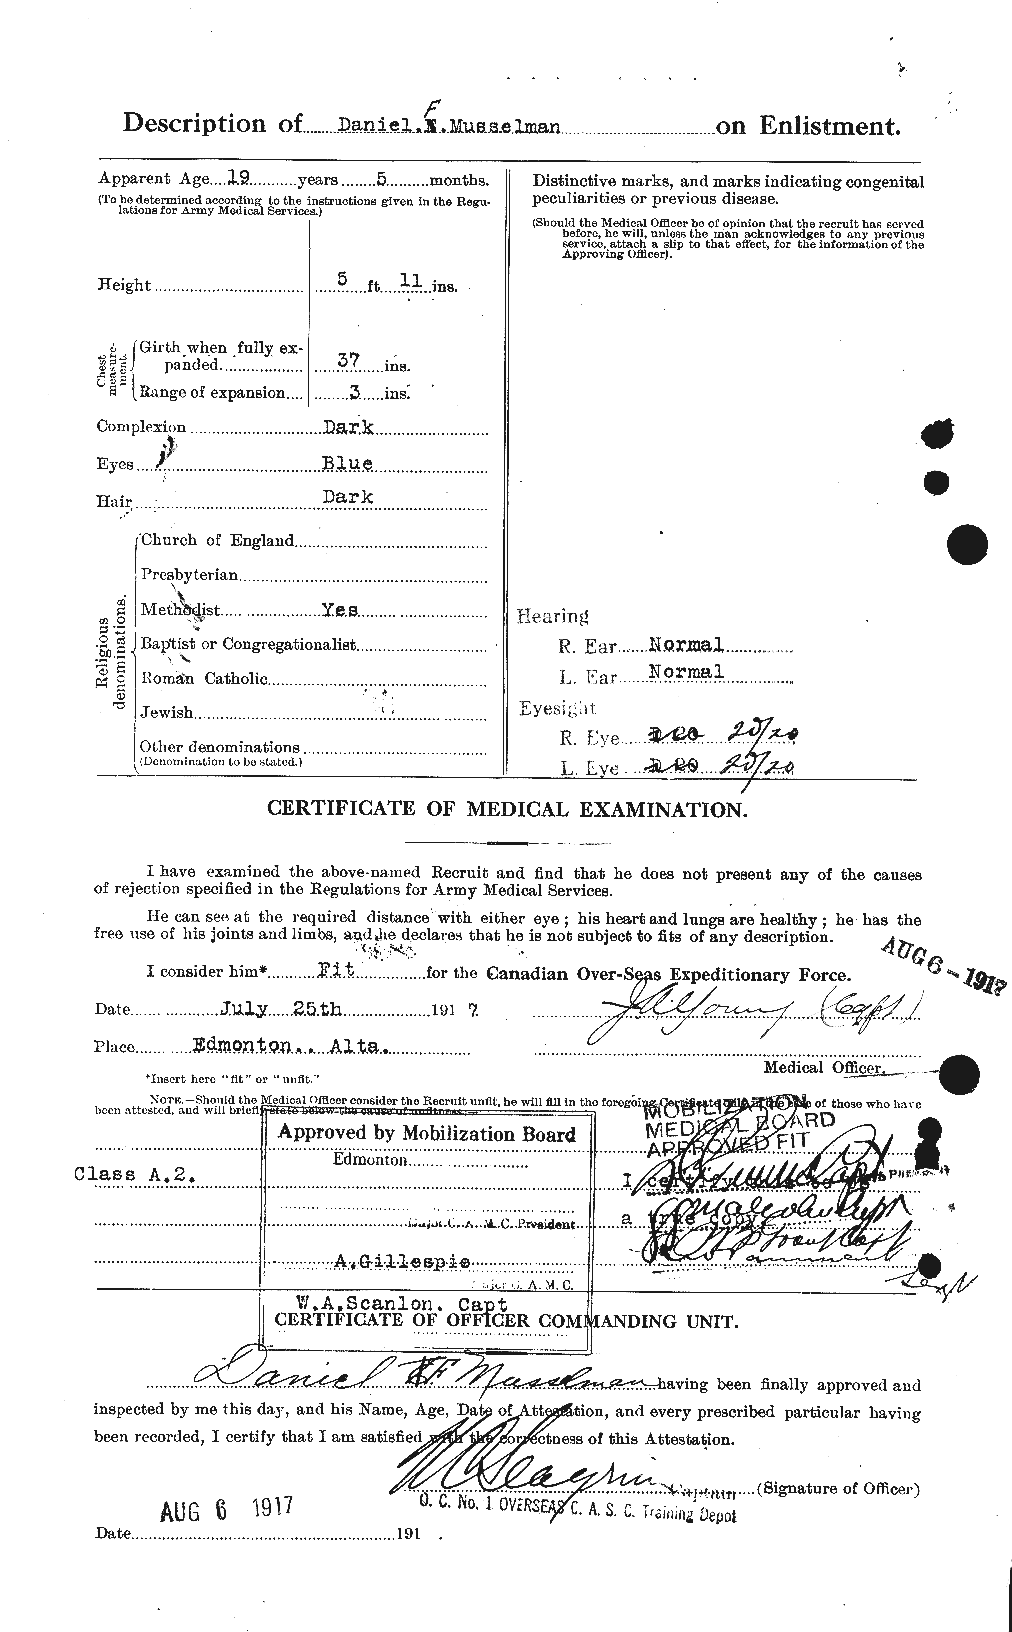 Personnel Records of the First World War - CEF 515019b